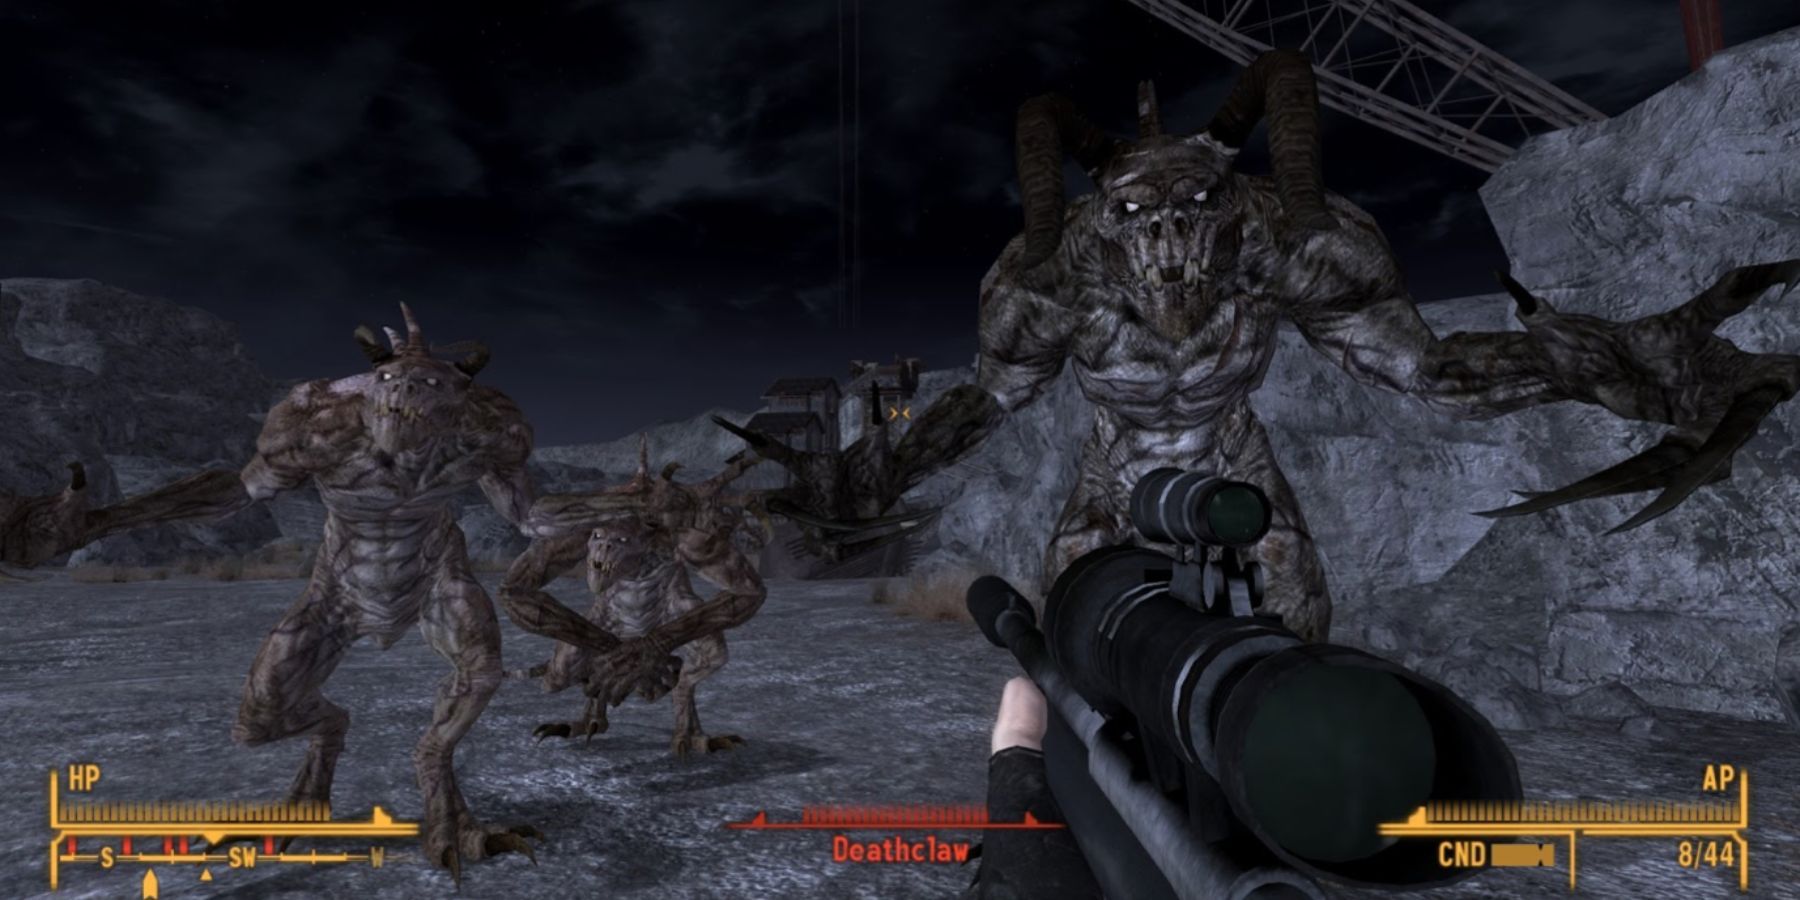 Deathclaw in Fallout New Vegas